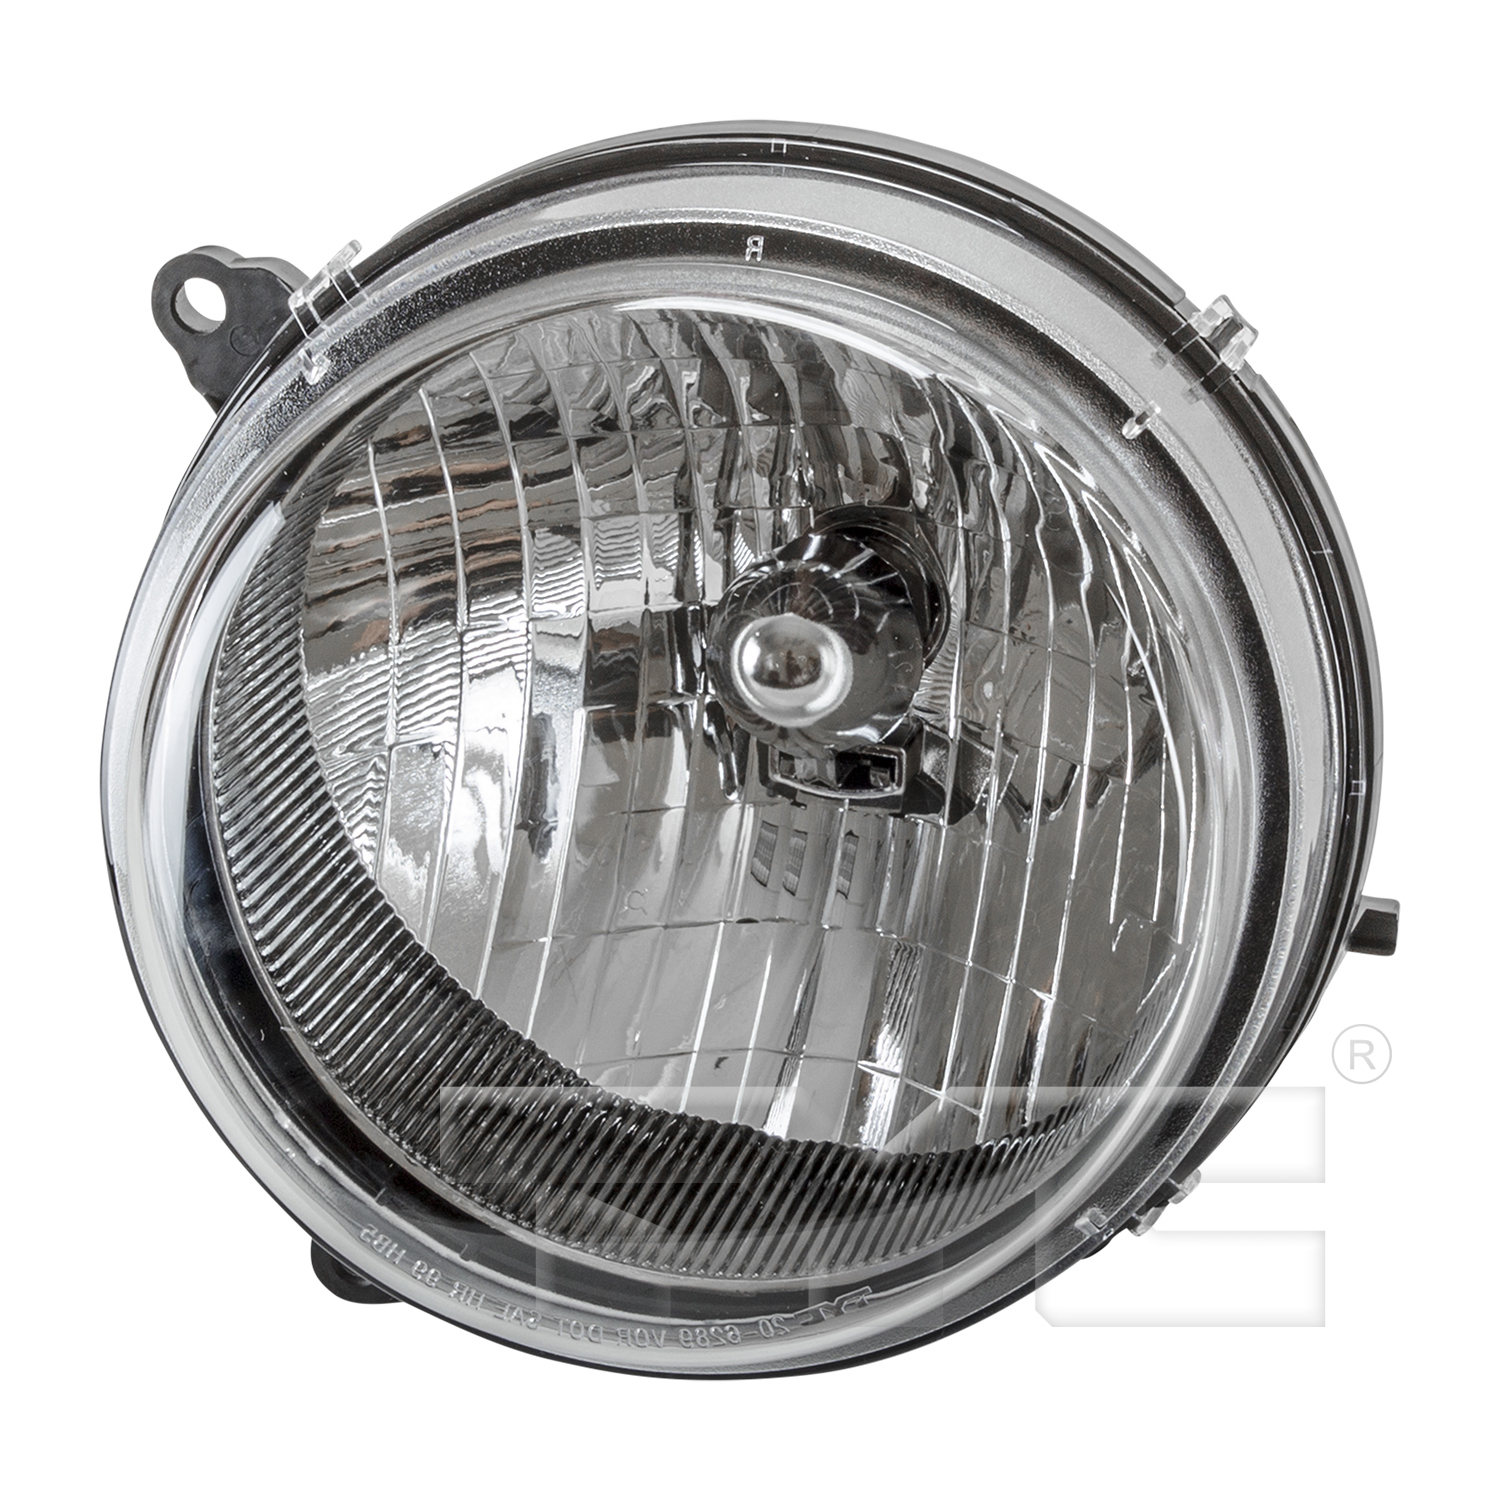 Aftermarket HEADLIGHTS for JEEP - LIBERTY, LIBERTY,03-04,LT Headlamp assy composite